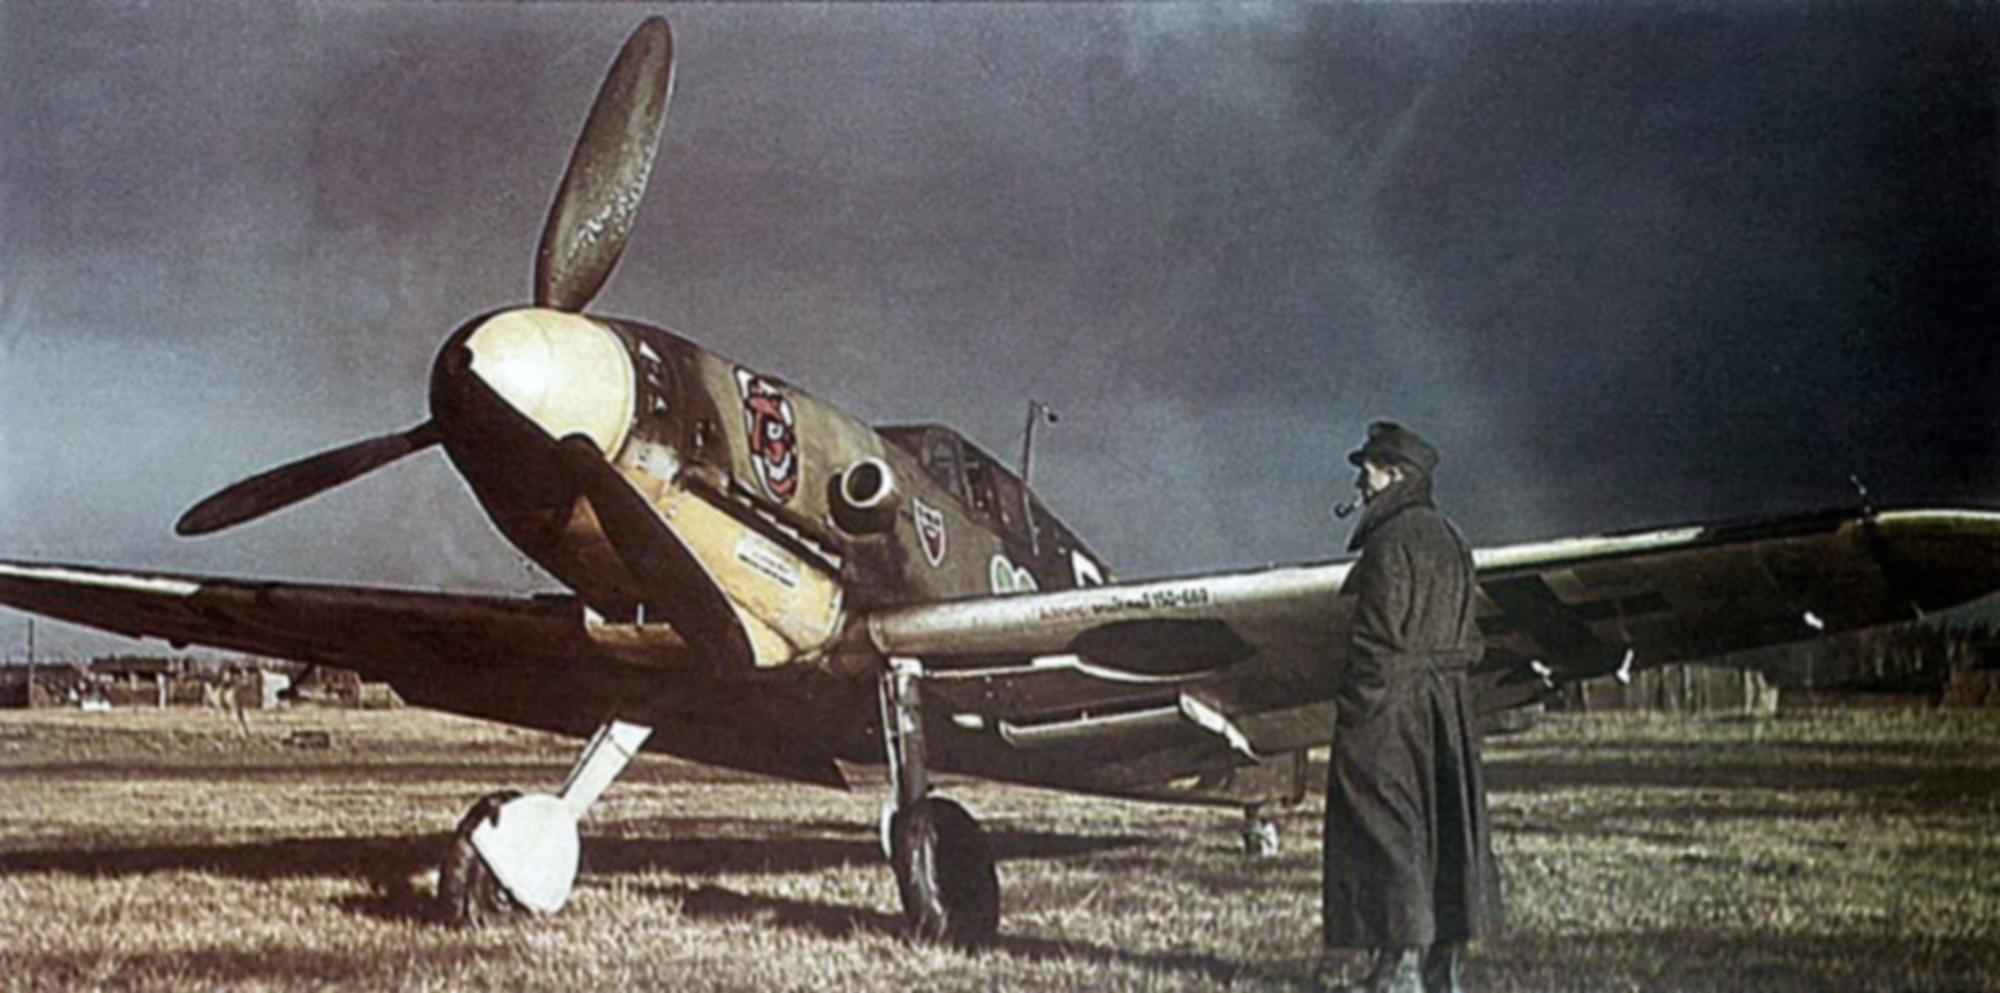 WW2 Picture Photo 1944 The exact moment when a Bf 109 crashed into ground 228 DE 